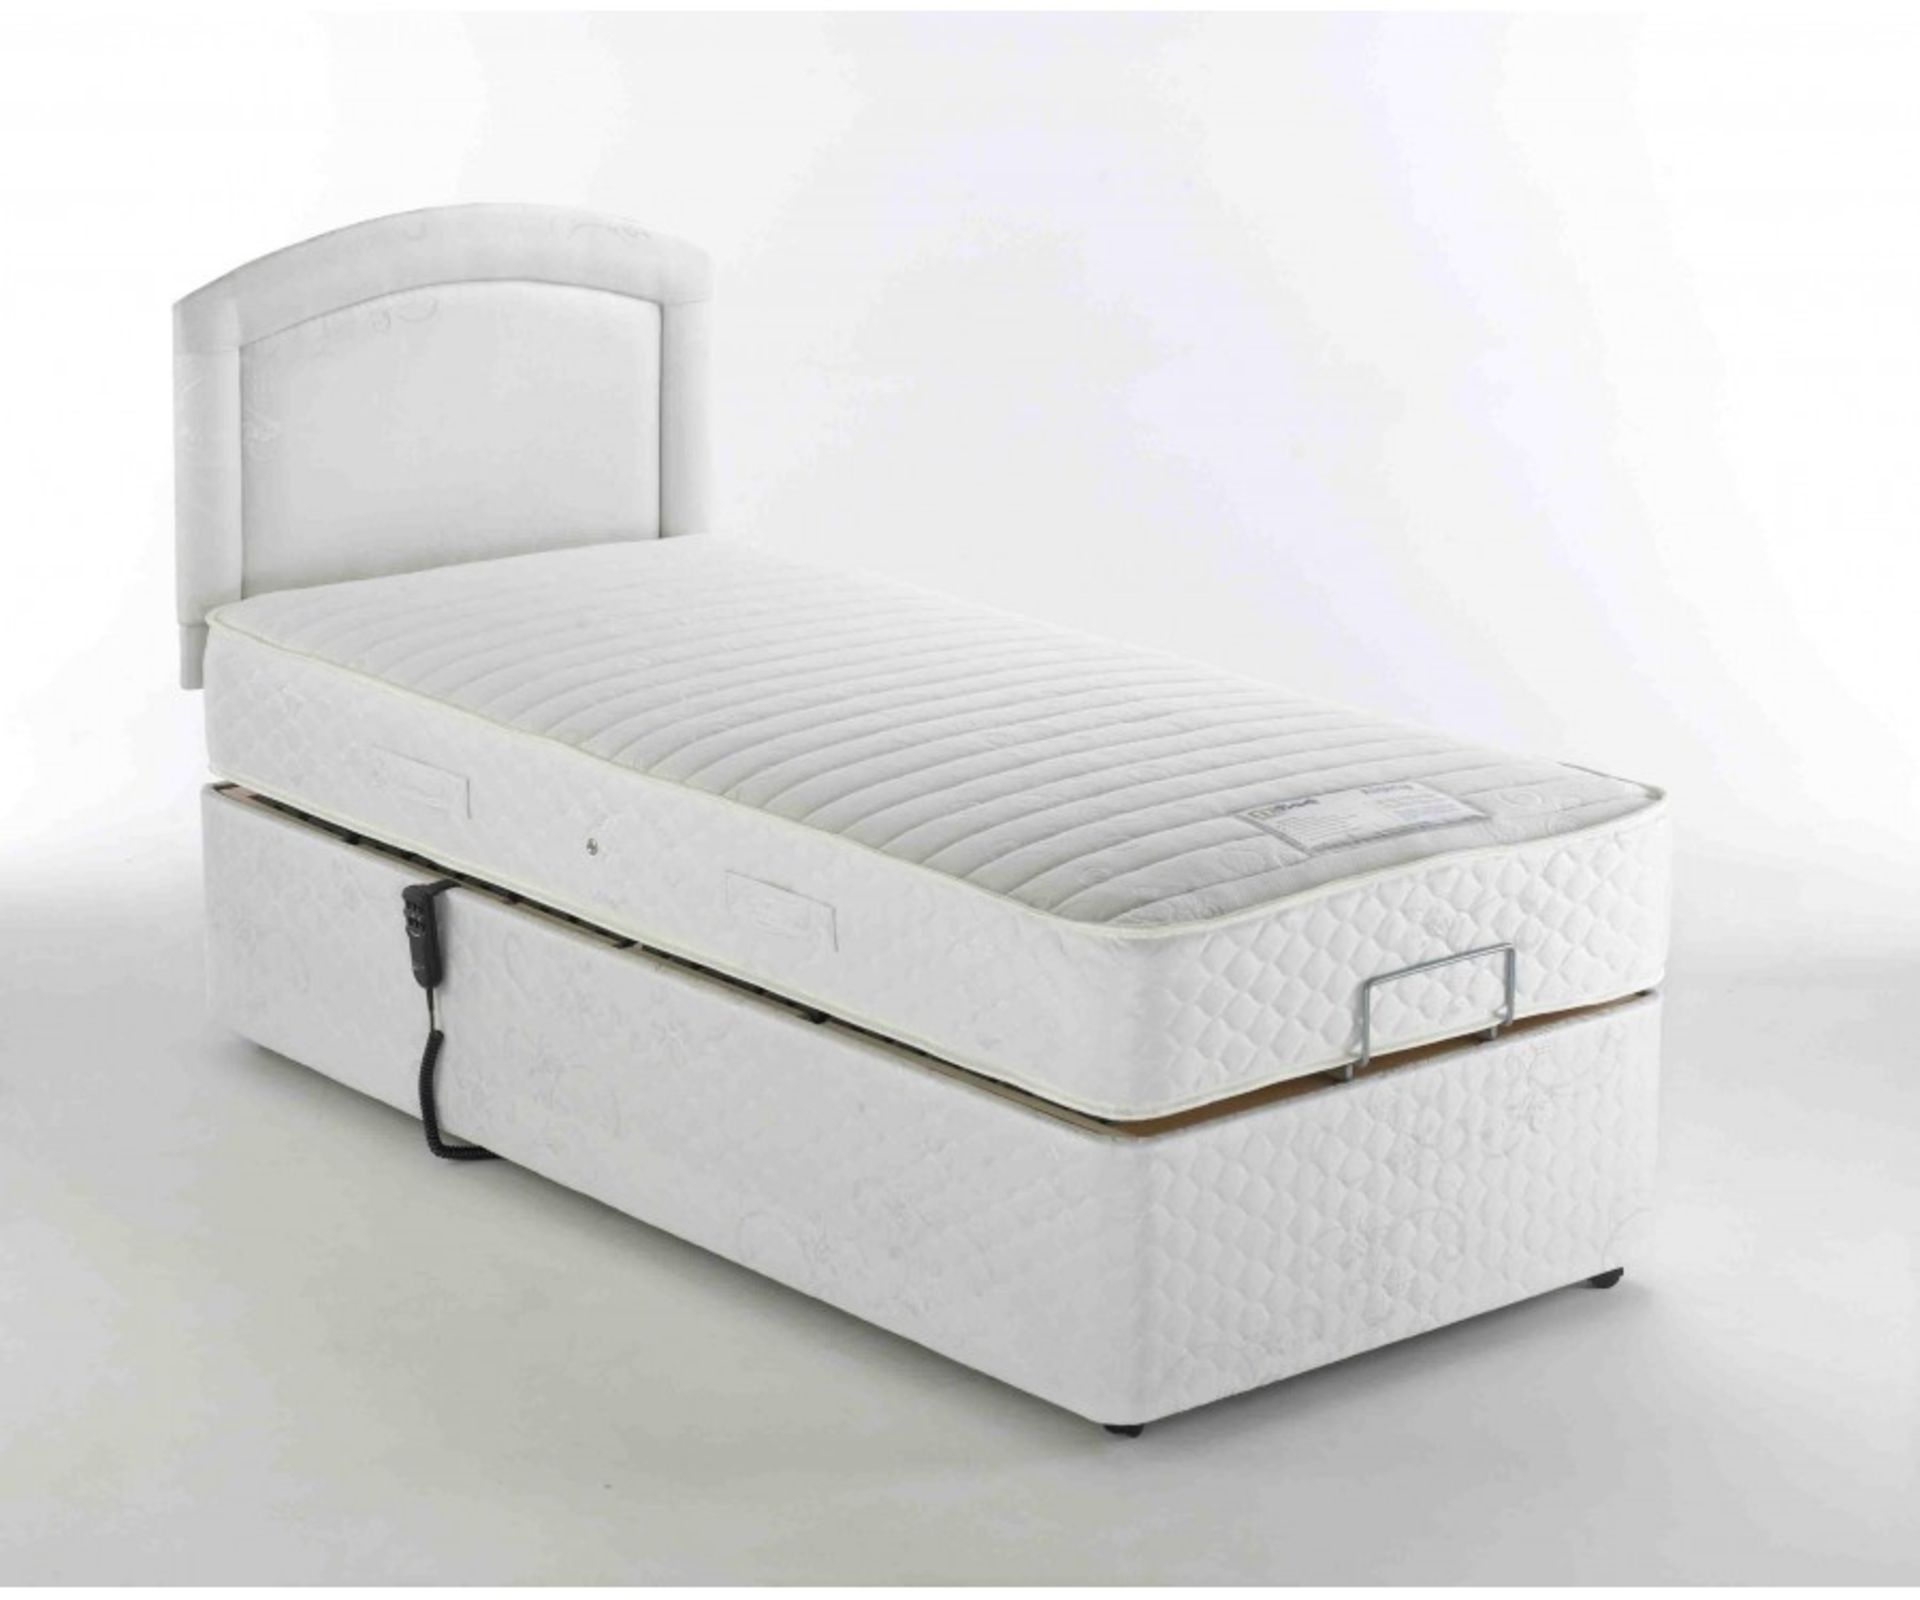 BRAND NEW 3'0 SINGLE ALPINA POCKET ELECTRIC ADJUSTABLE BED AND MATTRESS